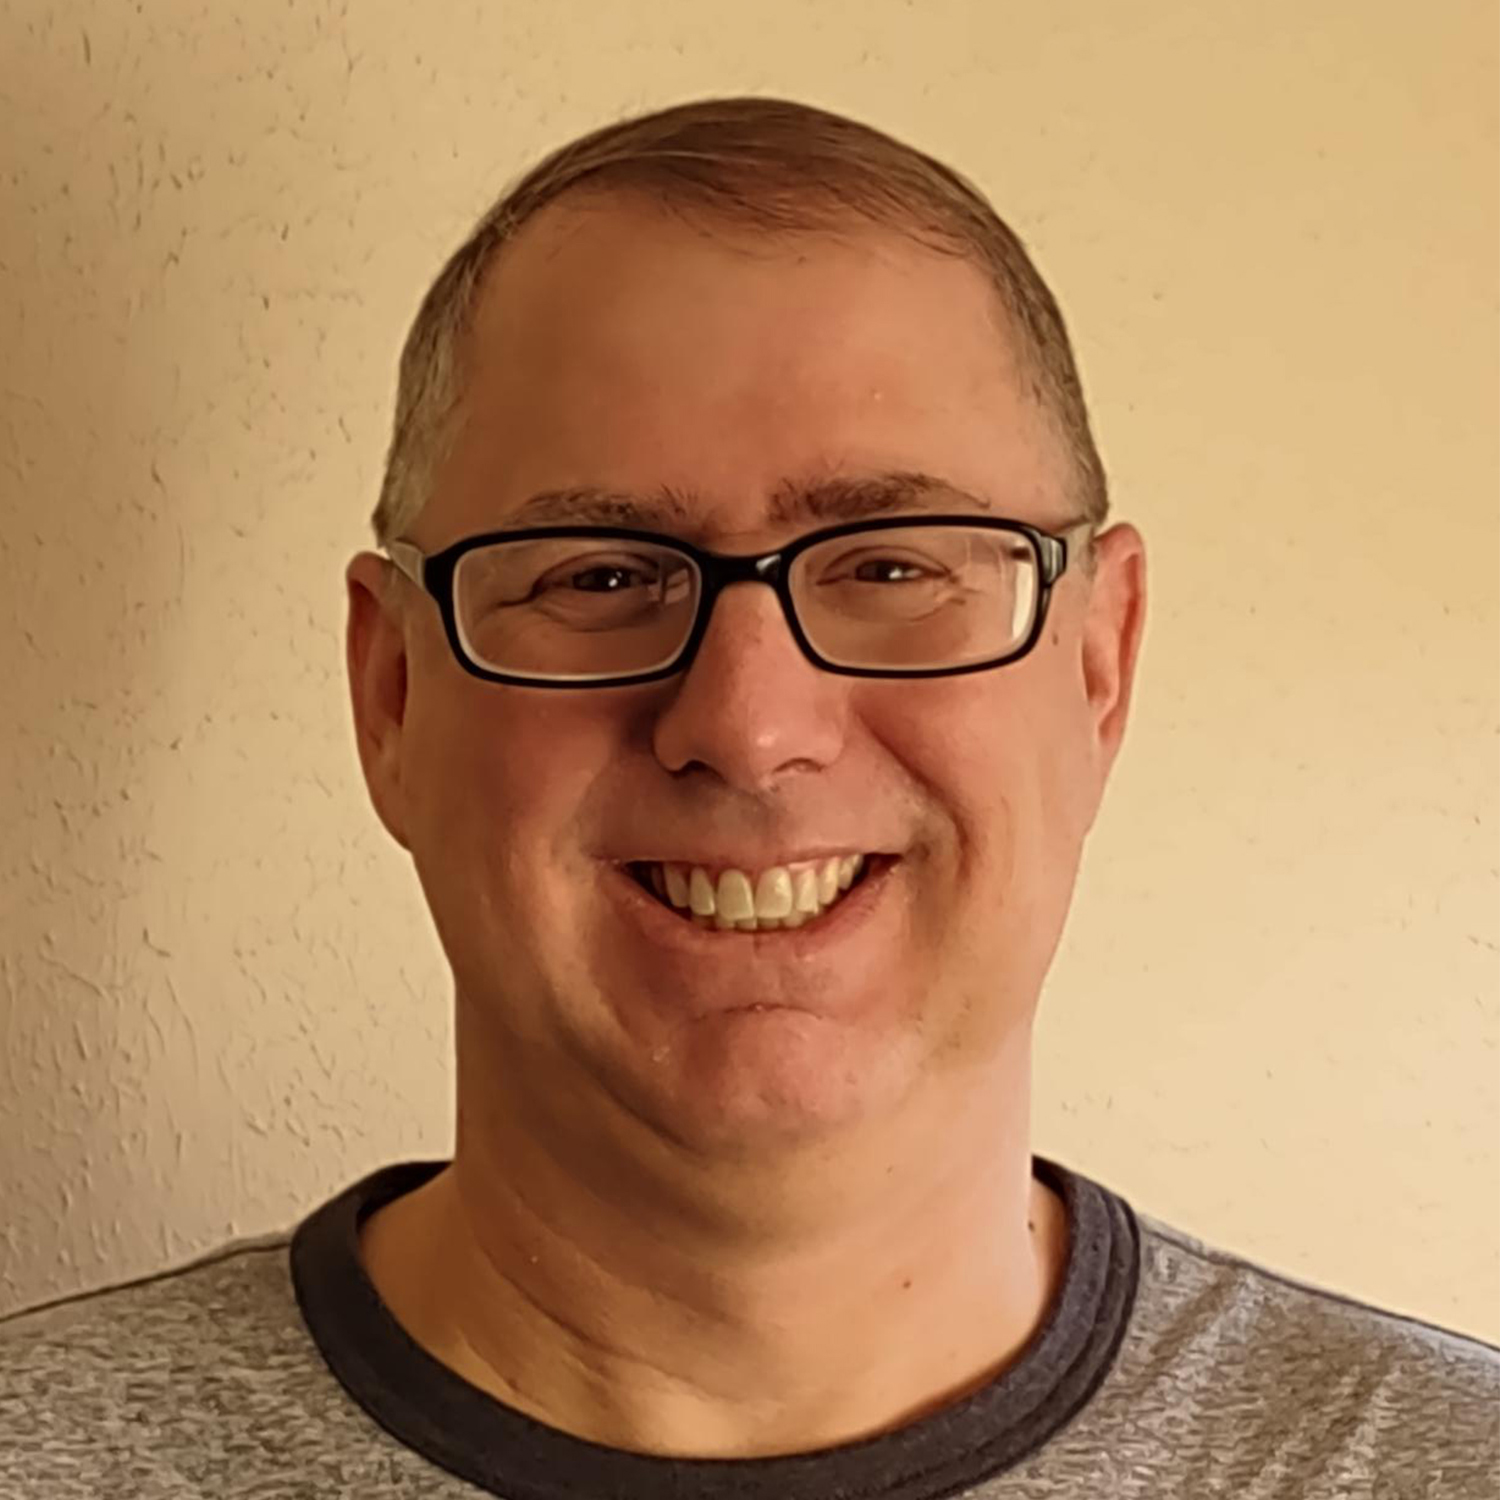 Man in a gray t-shirt with glasses smiling at the camera